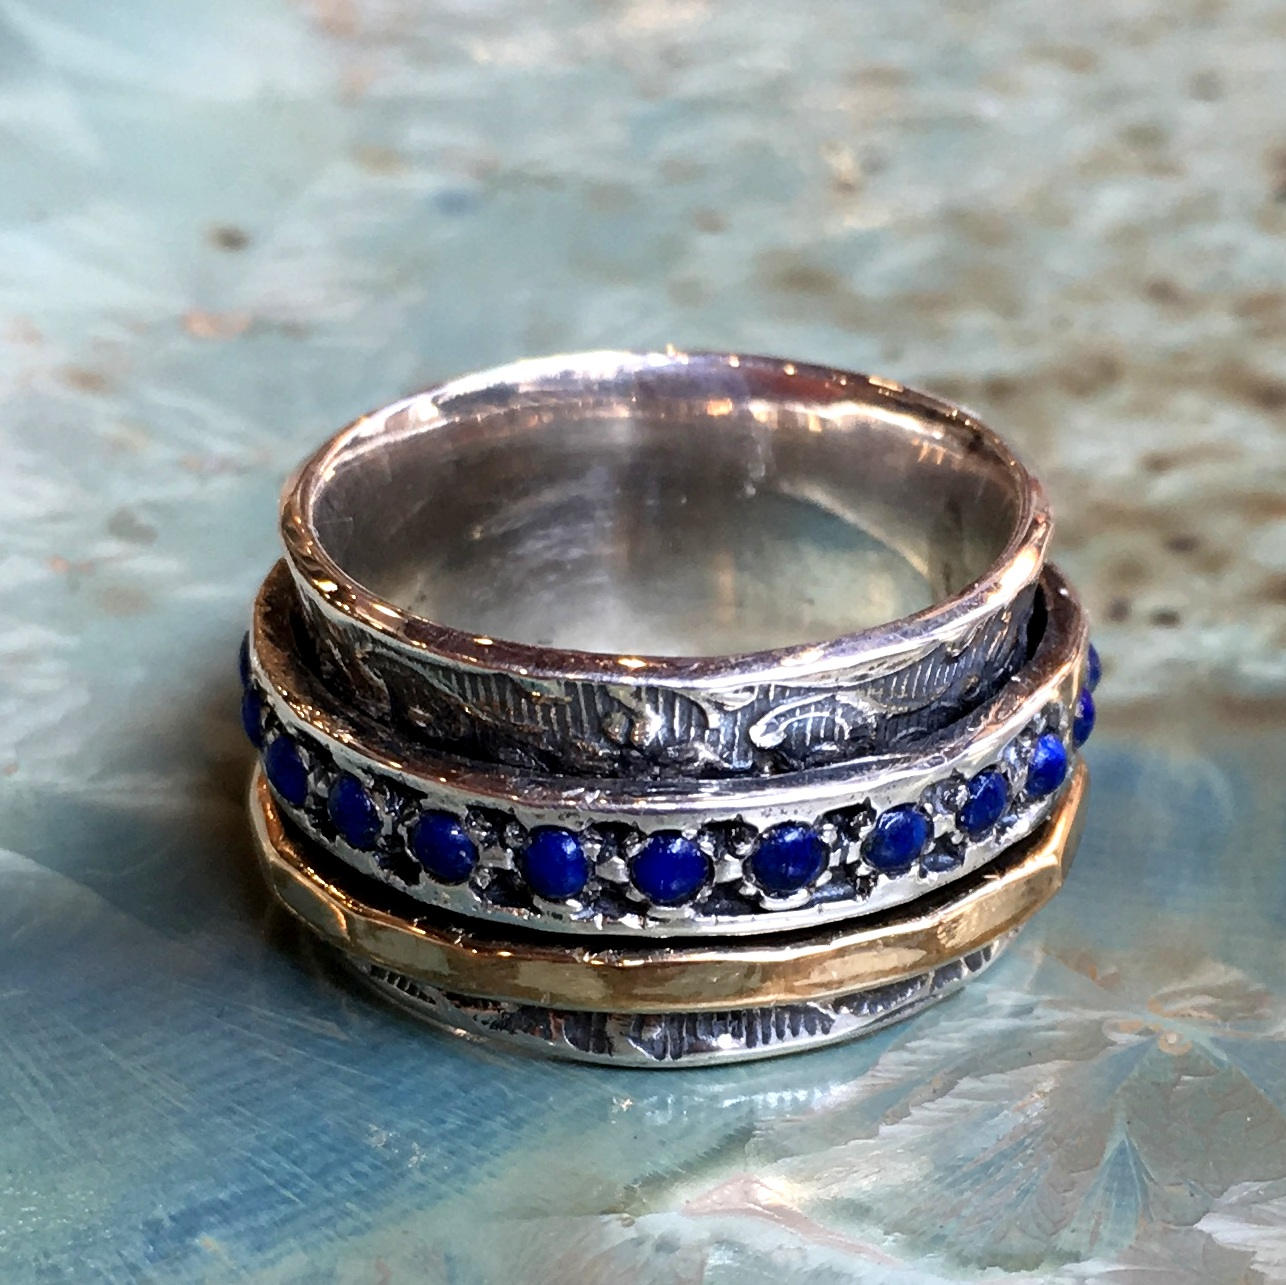 Lapis ring, wide silver ring, Meditation ring, Silver gold filled ring, two tones stacking ring, wedding ring - Edge of the World R1209G-4